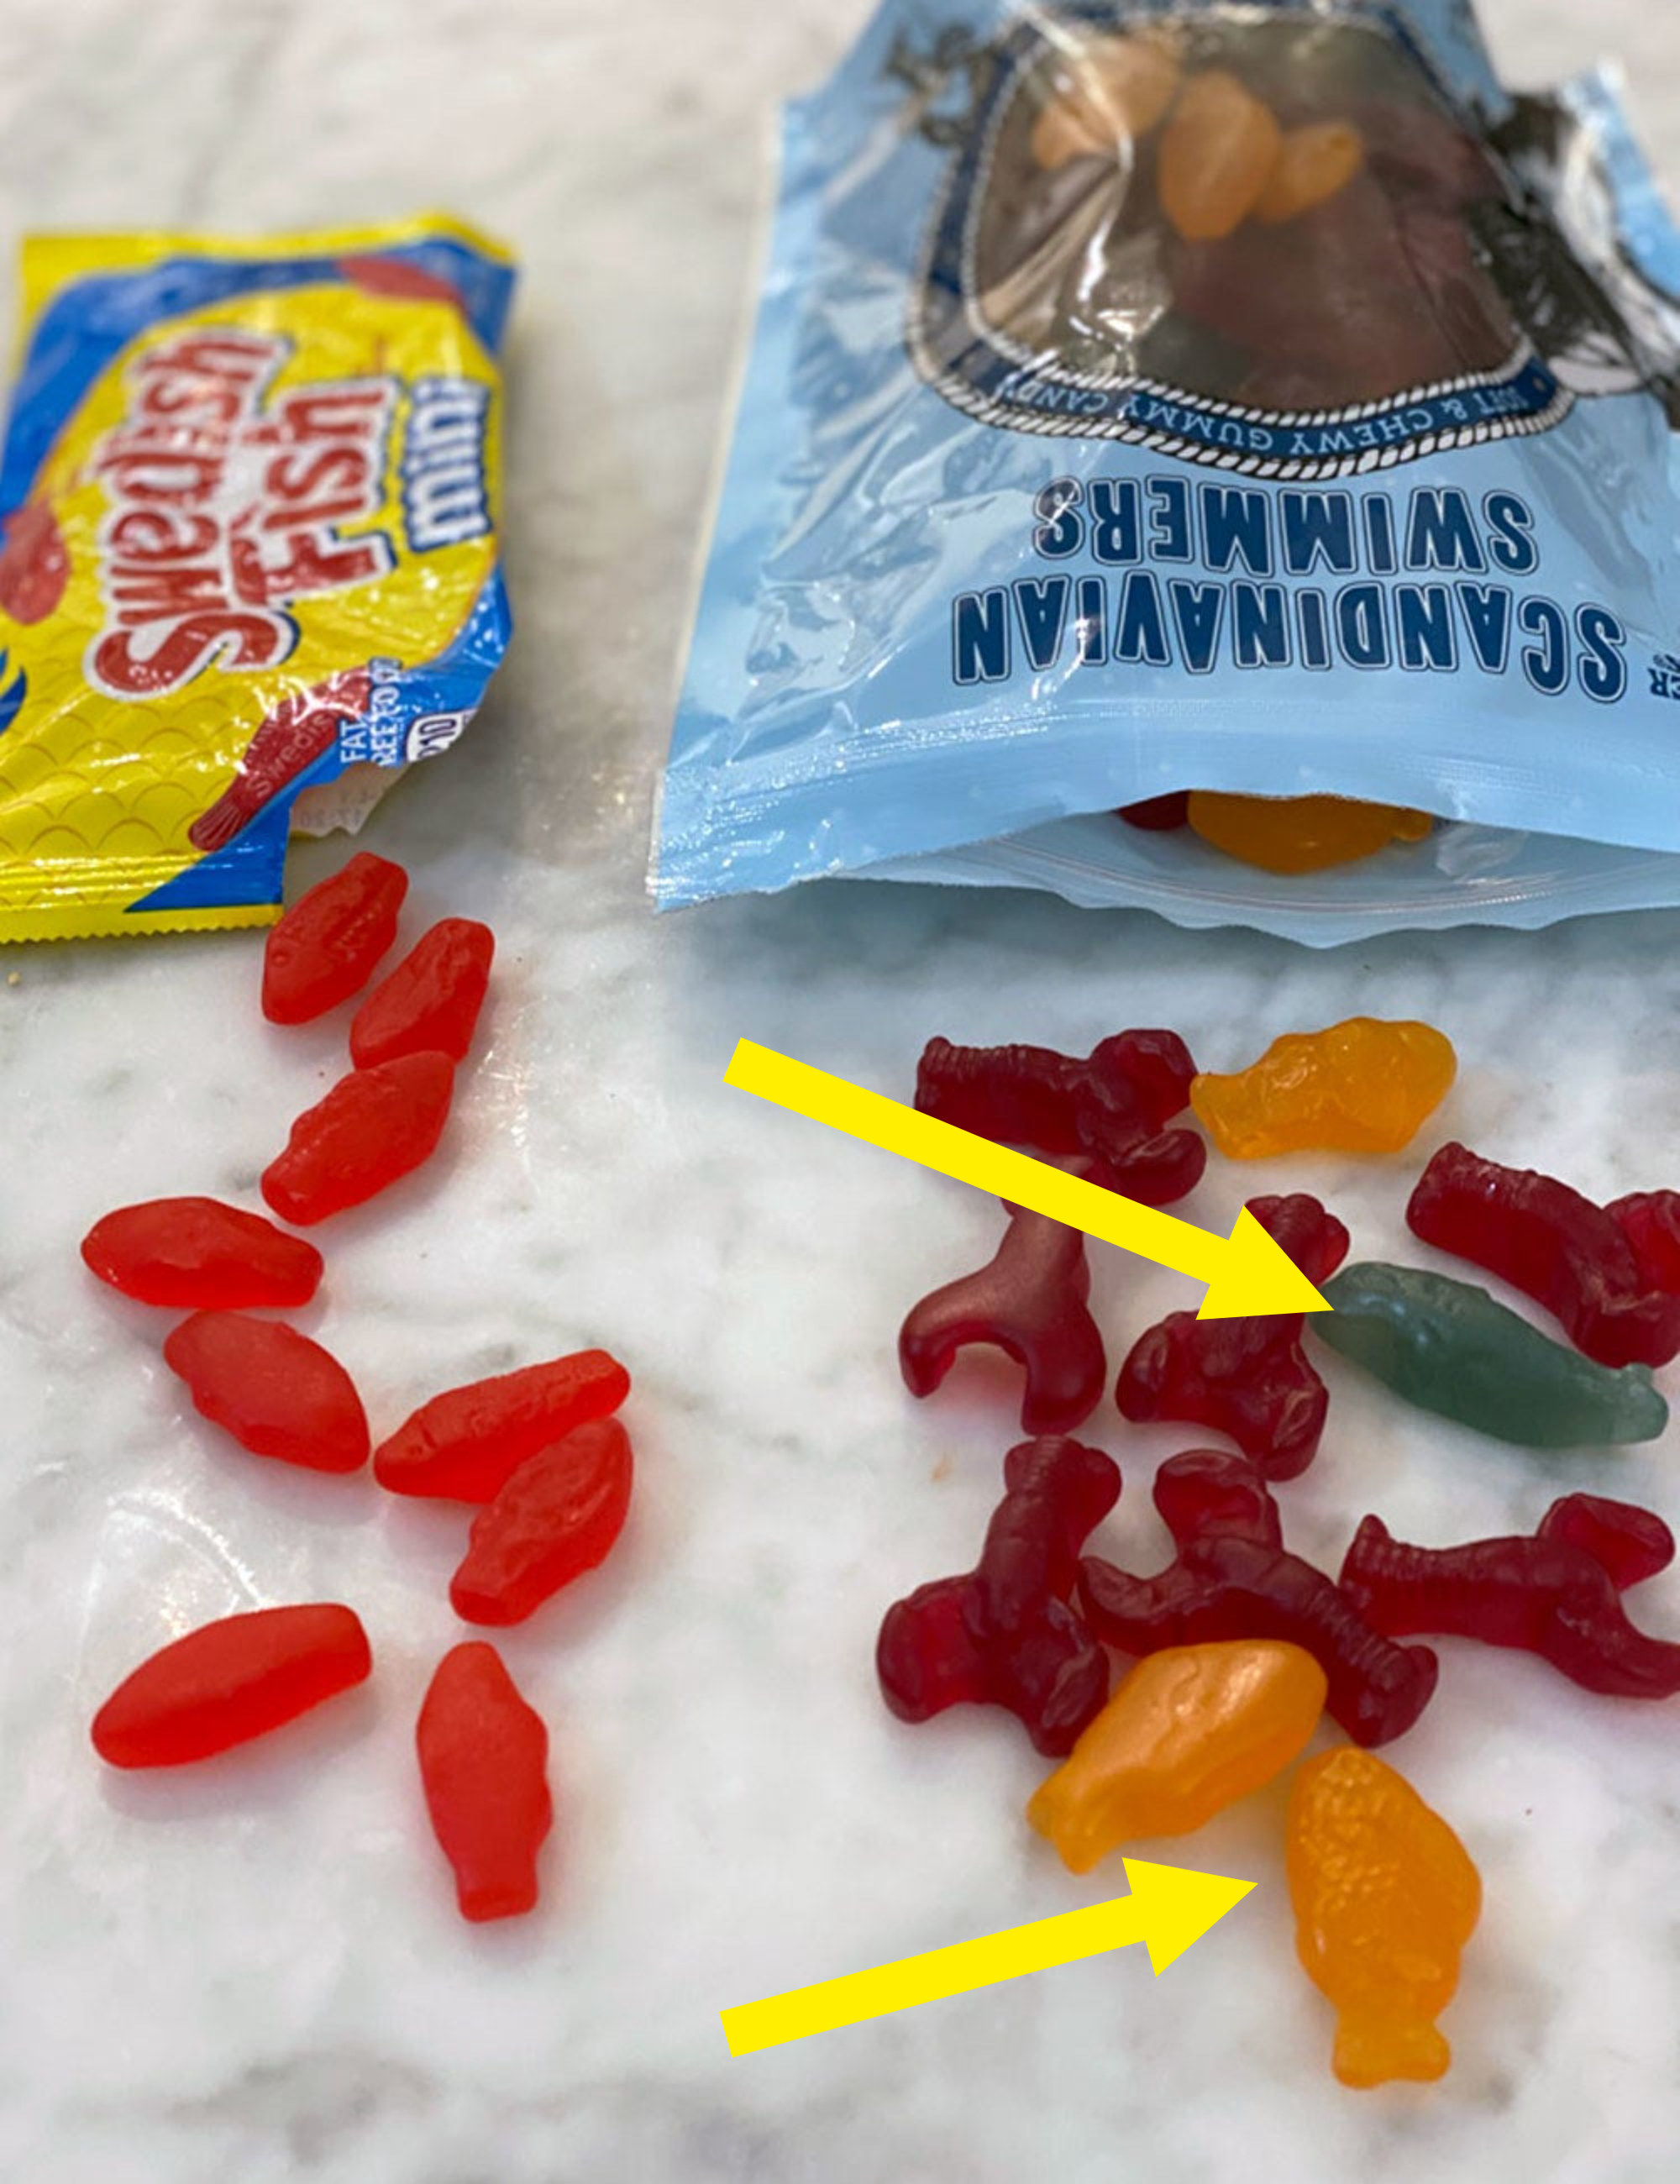 Mini Swedish Fish and Scandinavian Swimmers on a table